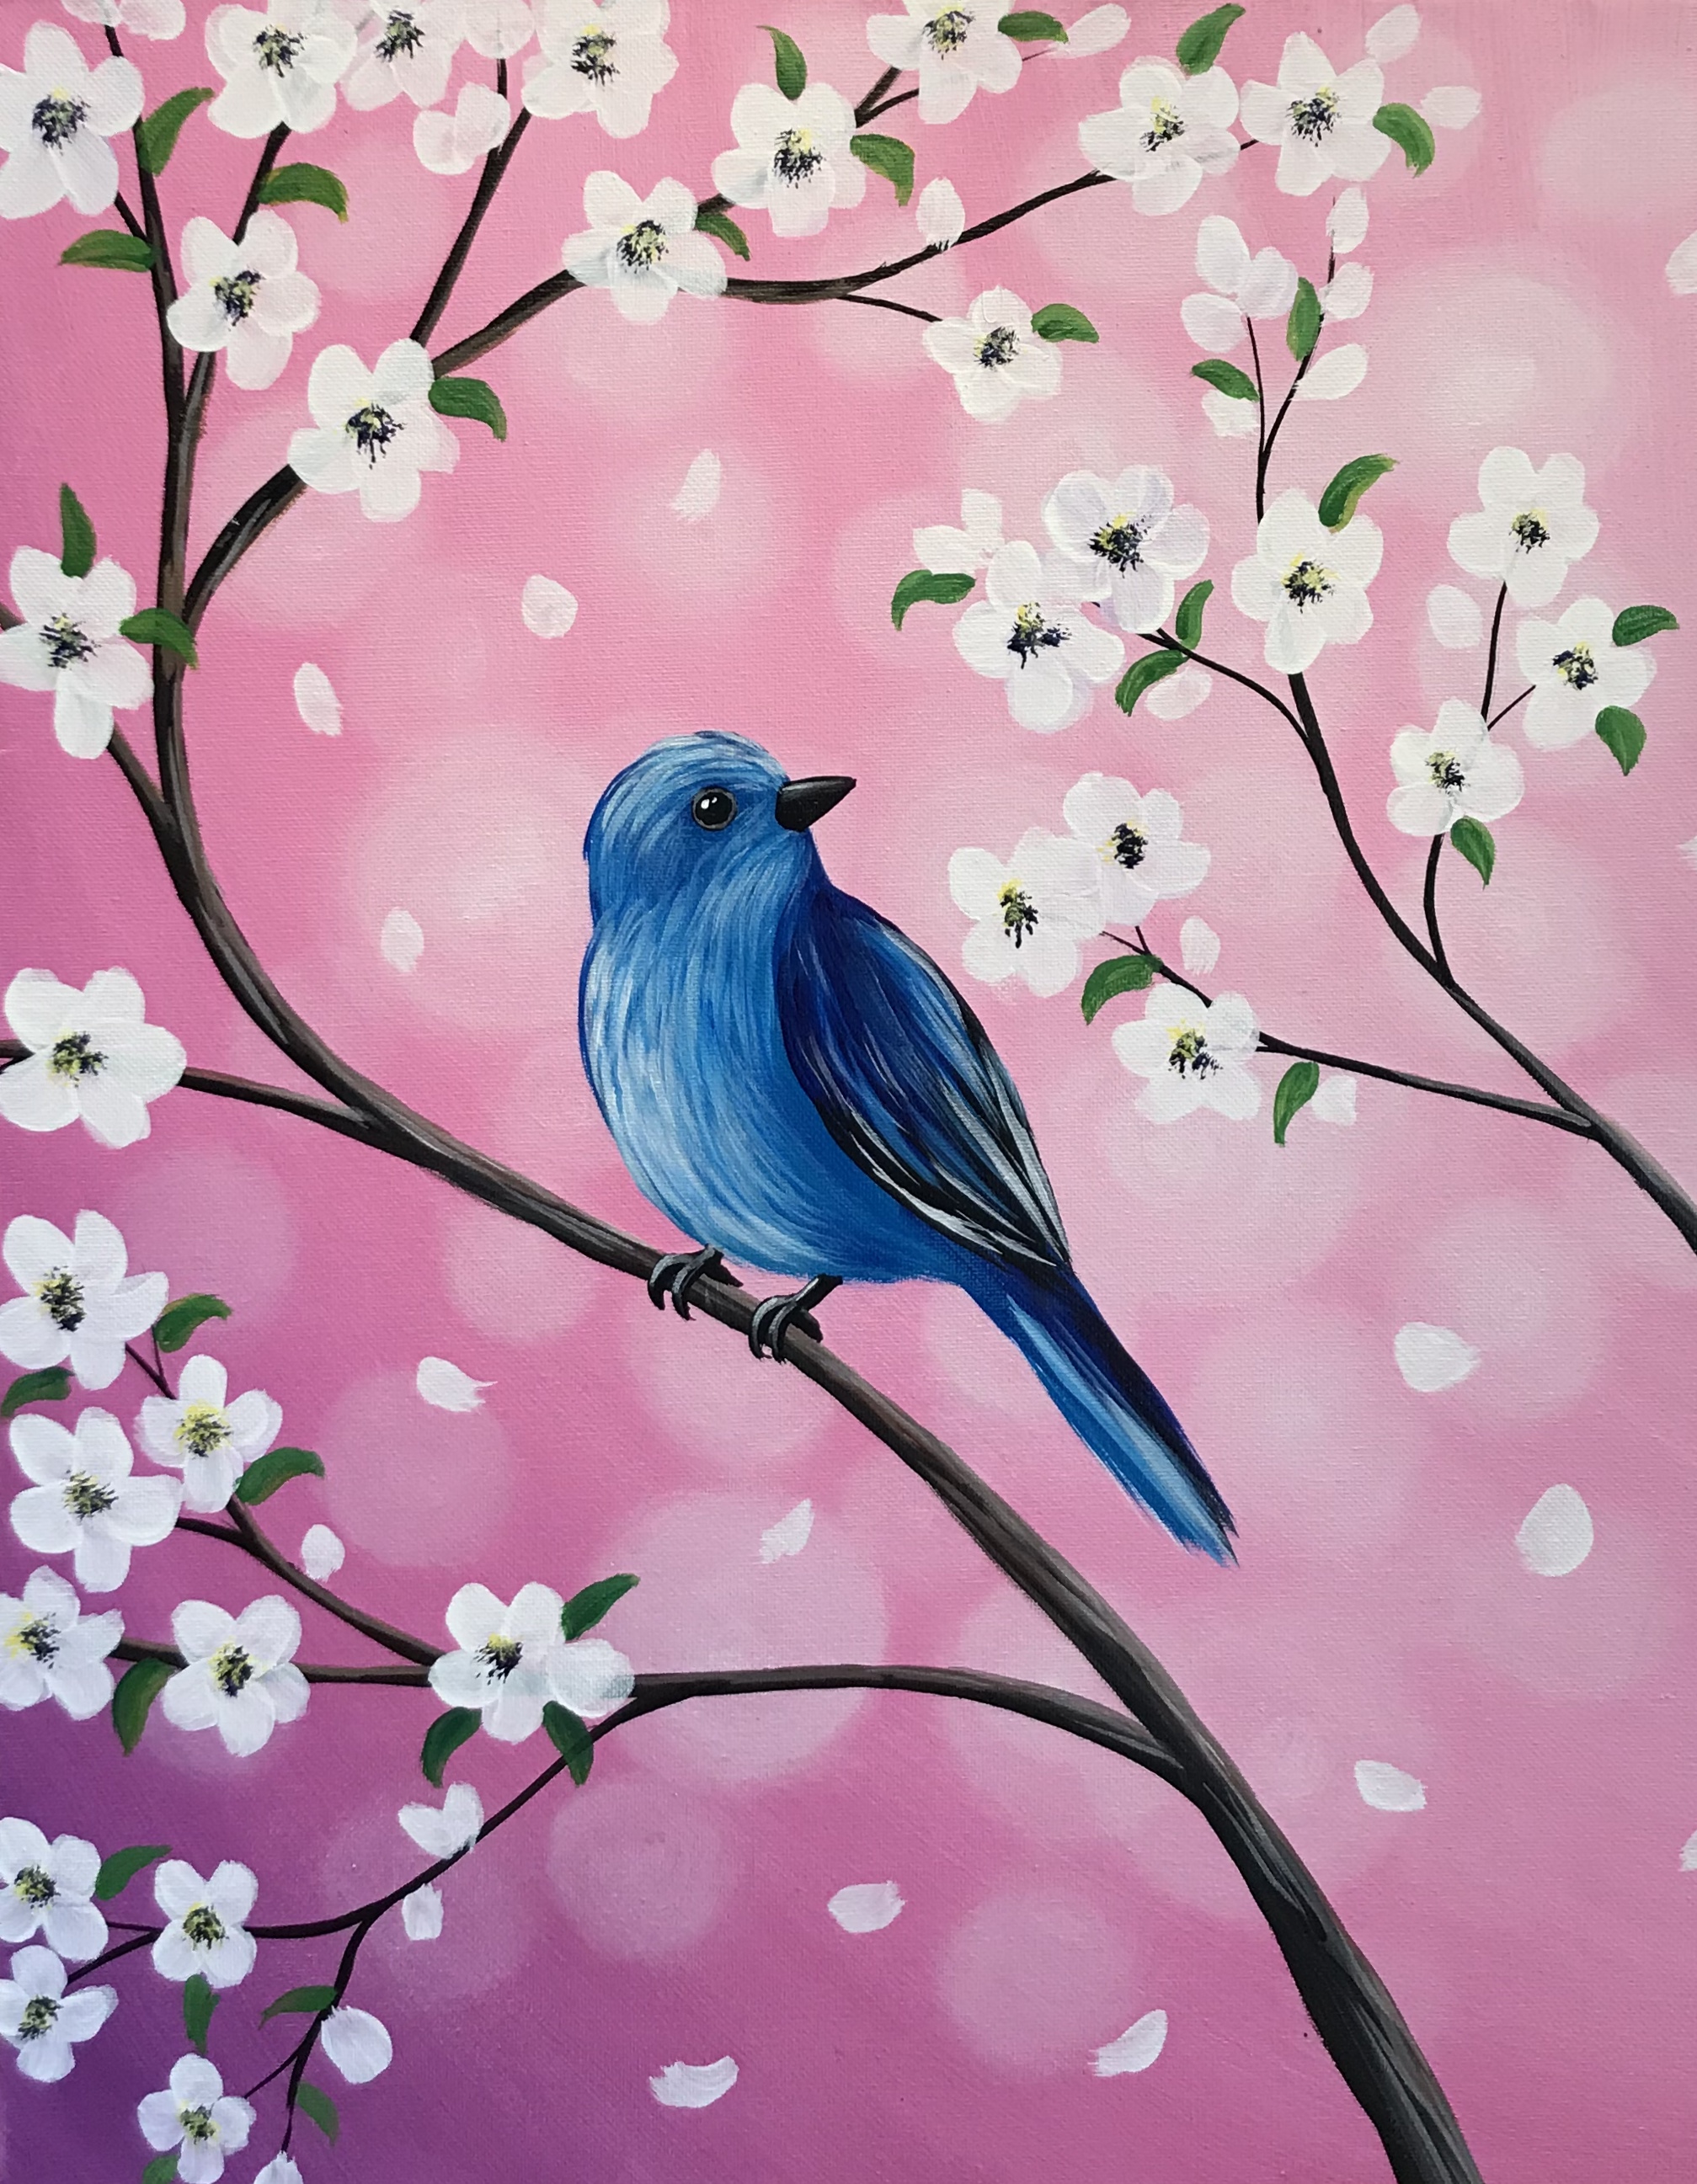 A Bluebird Bokeh Blossoms experience project by Yaymaker